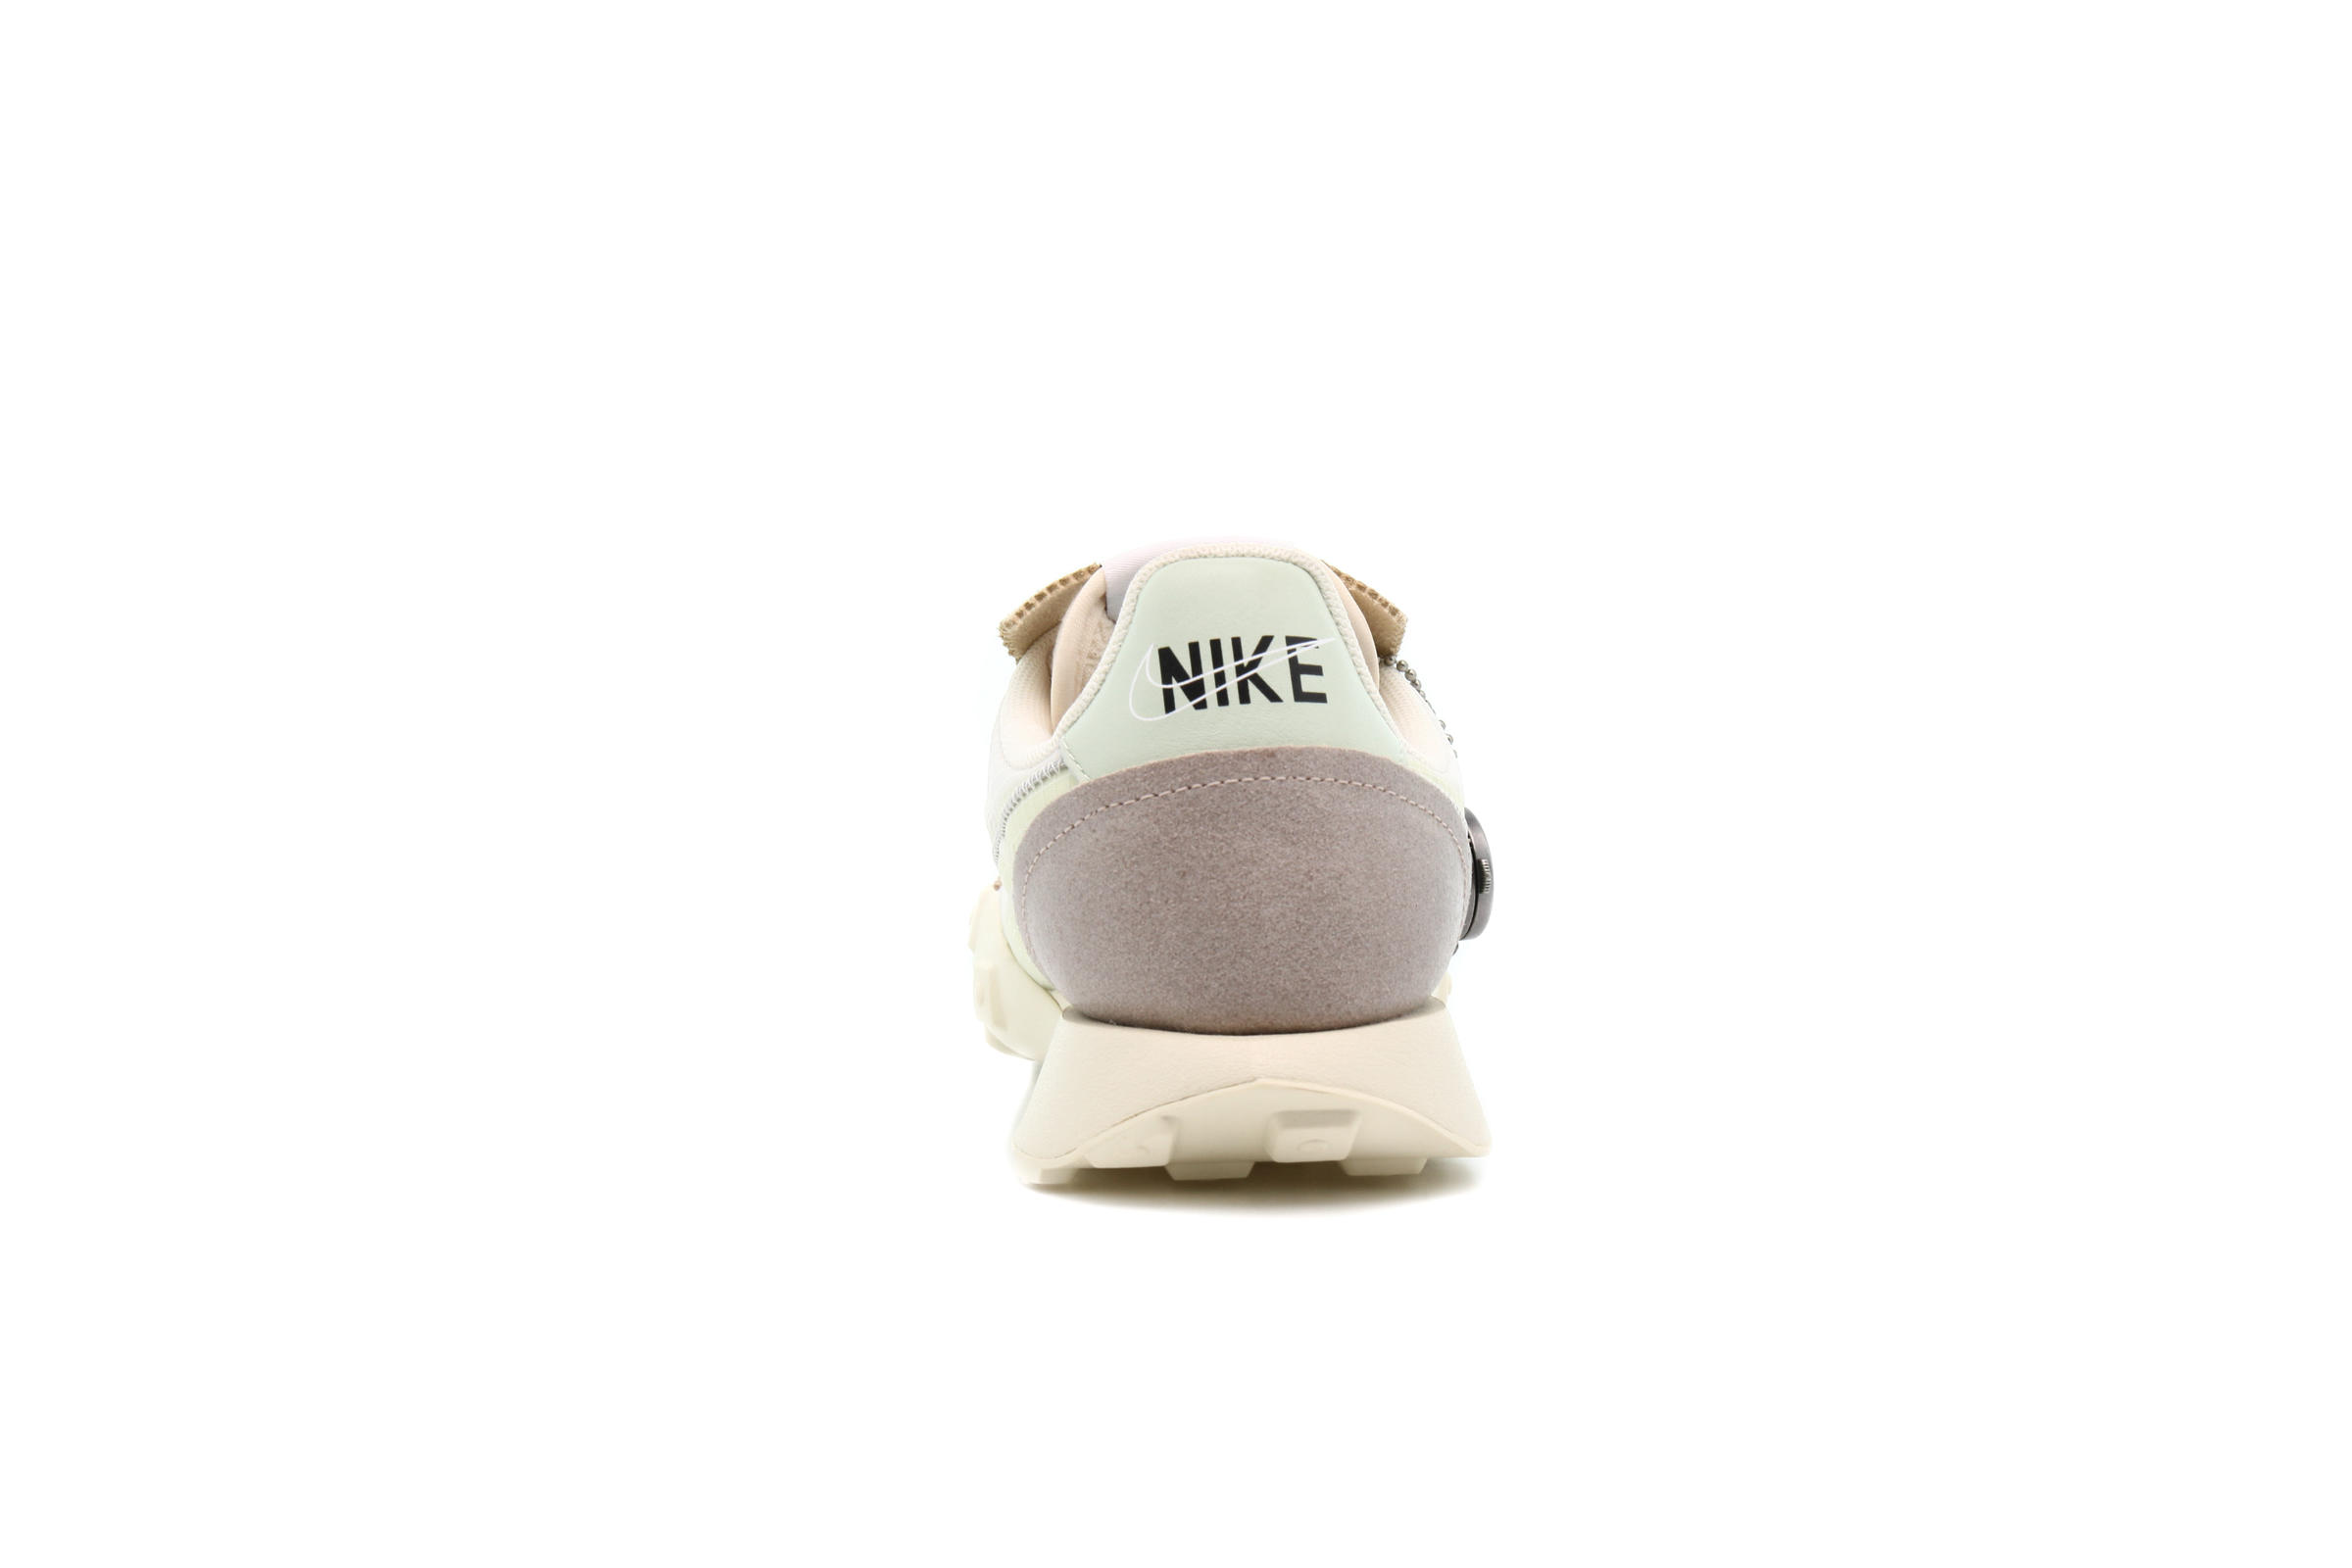 Nike WMNS WAFFLE RACER LX SERIES QS "PALE IVORY"